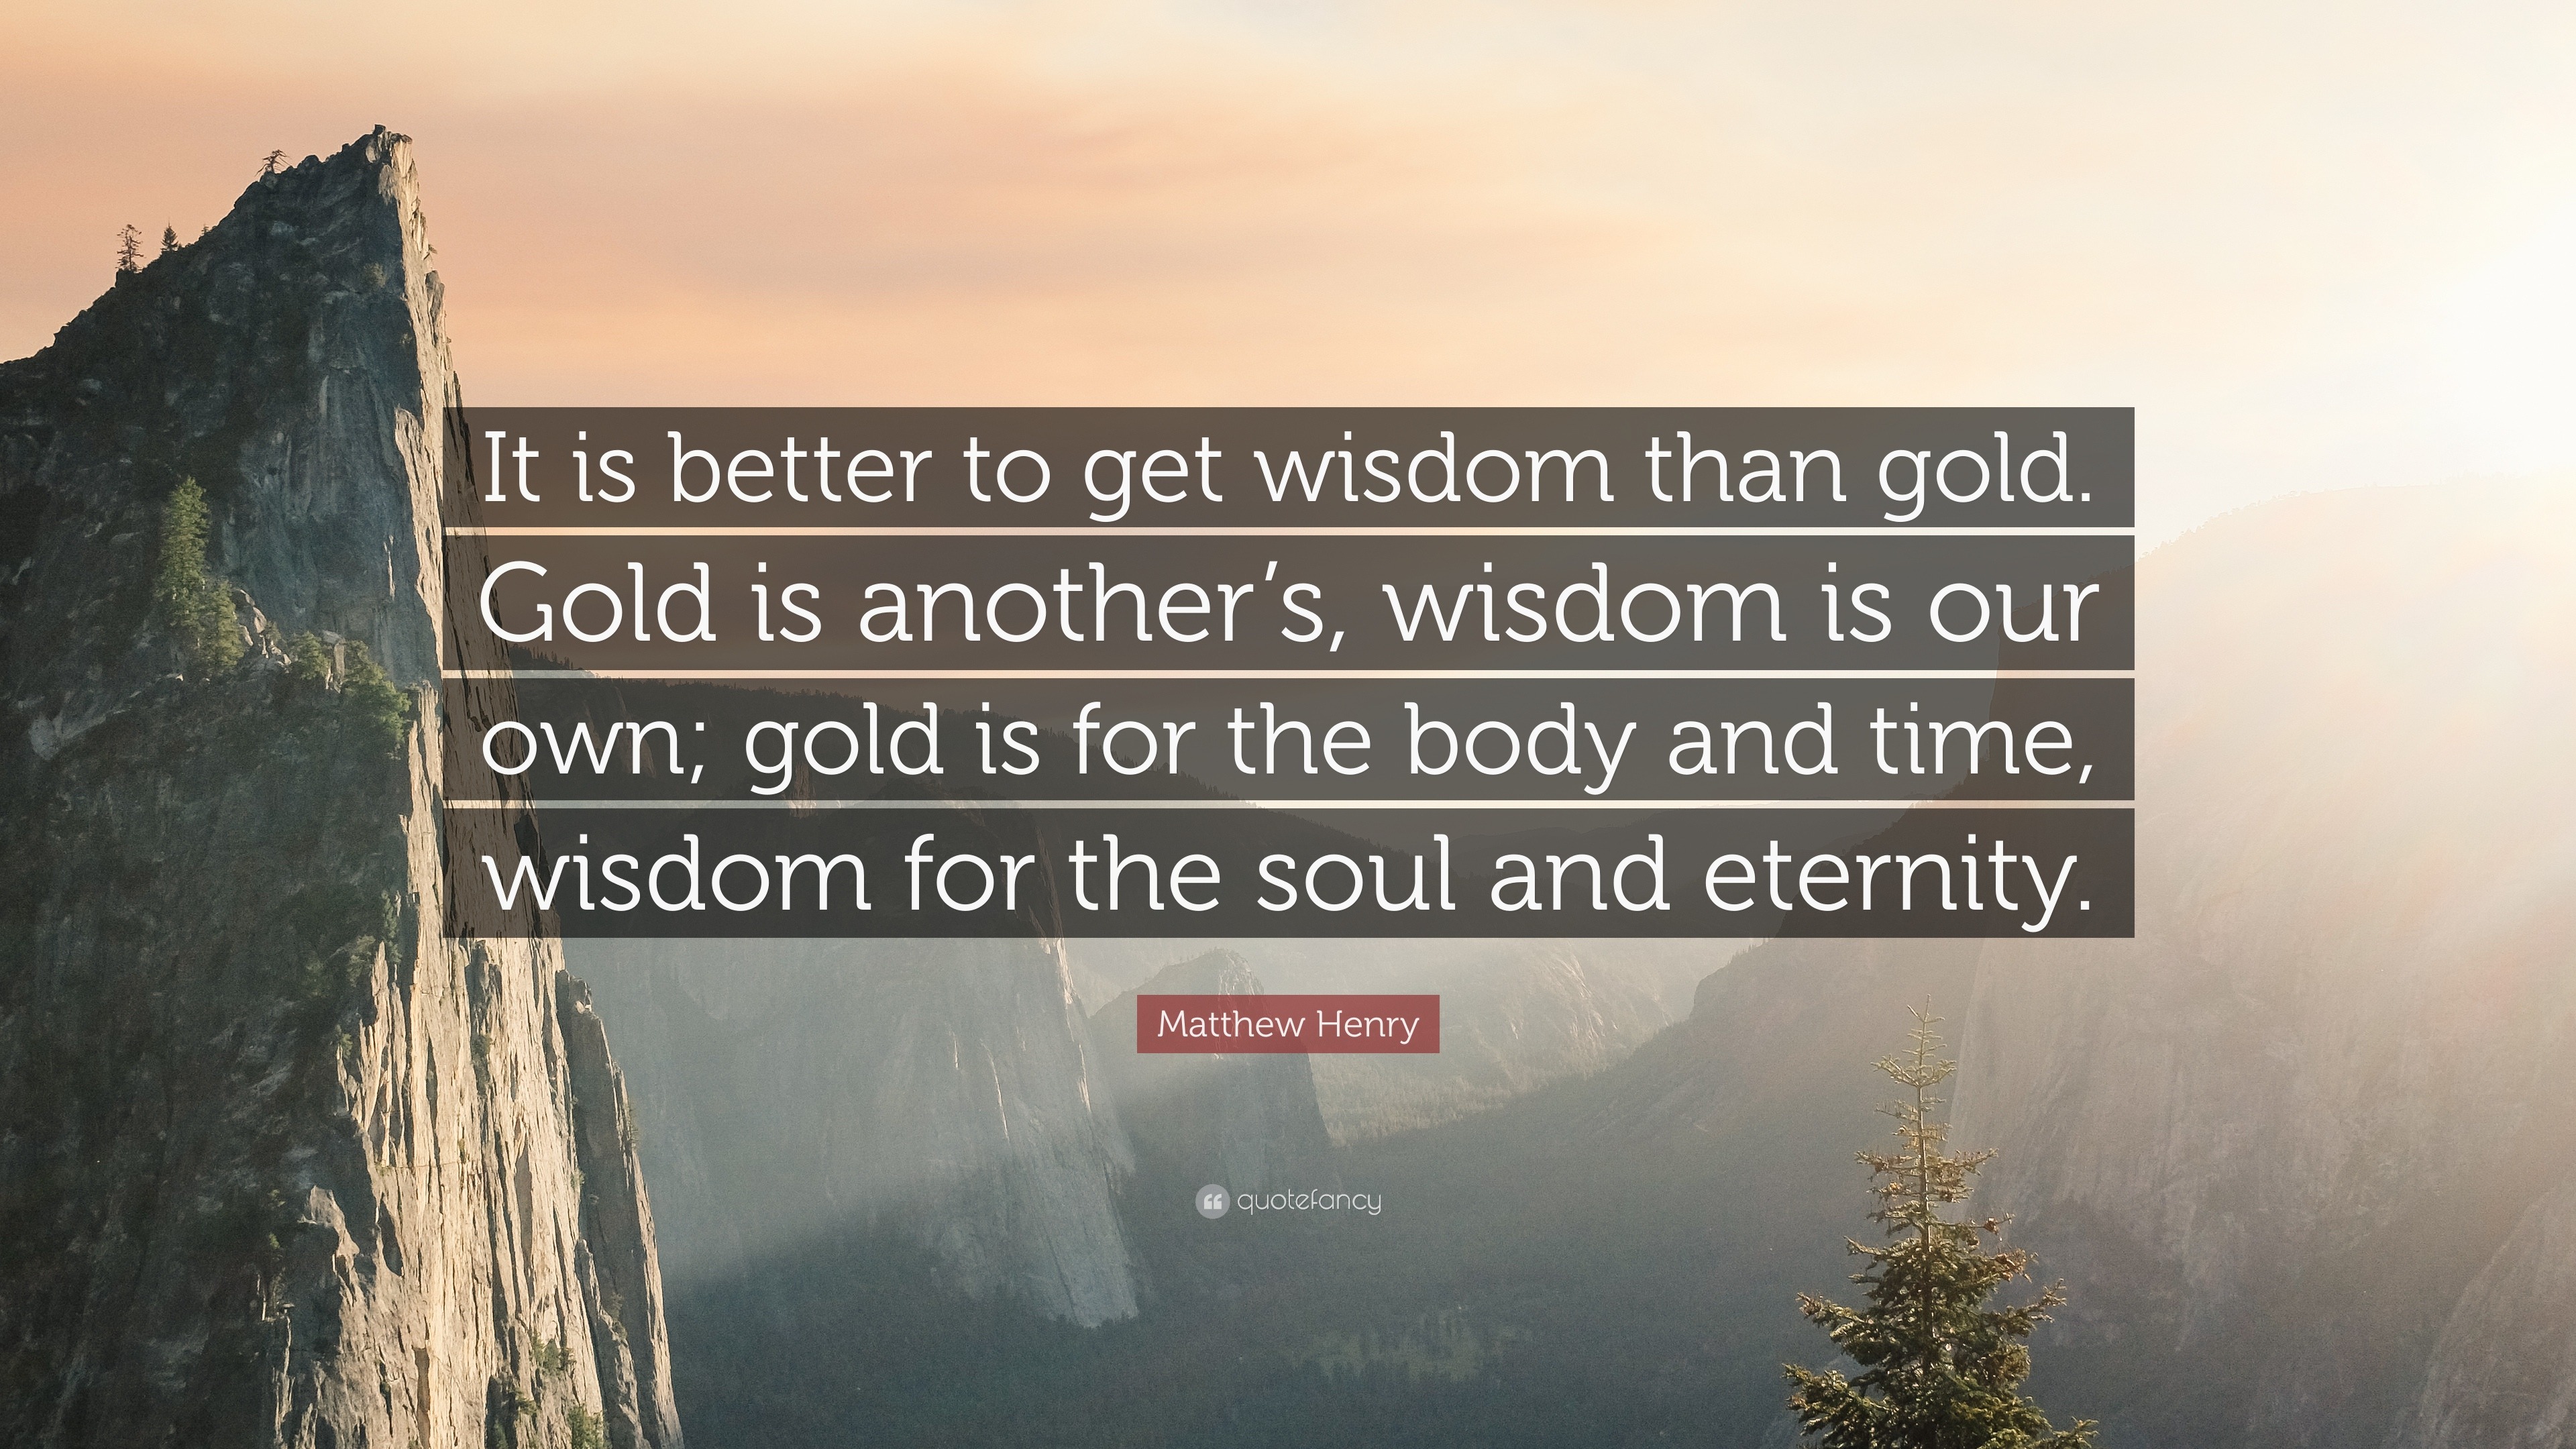 Matthew Henry Quote: “It is better to get wisdom than gold. Gold is  another's, wisdom is our own; gold is for the body and time, wisdom for  th”